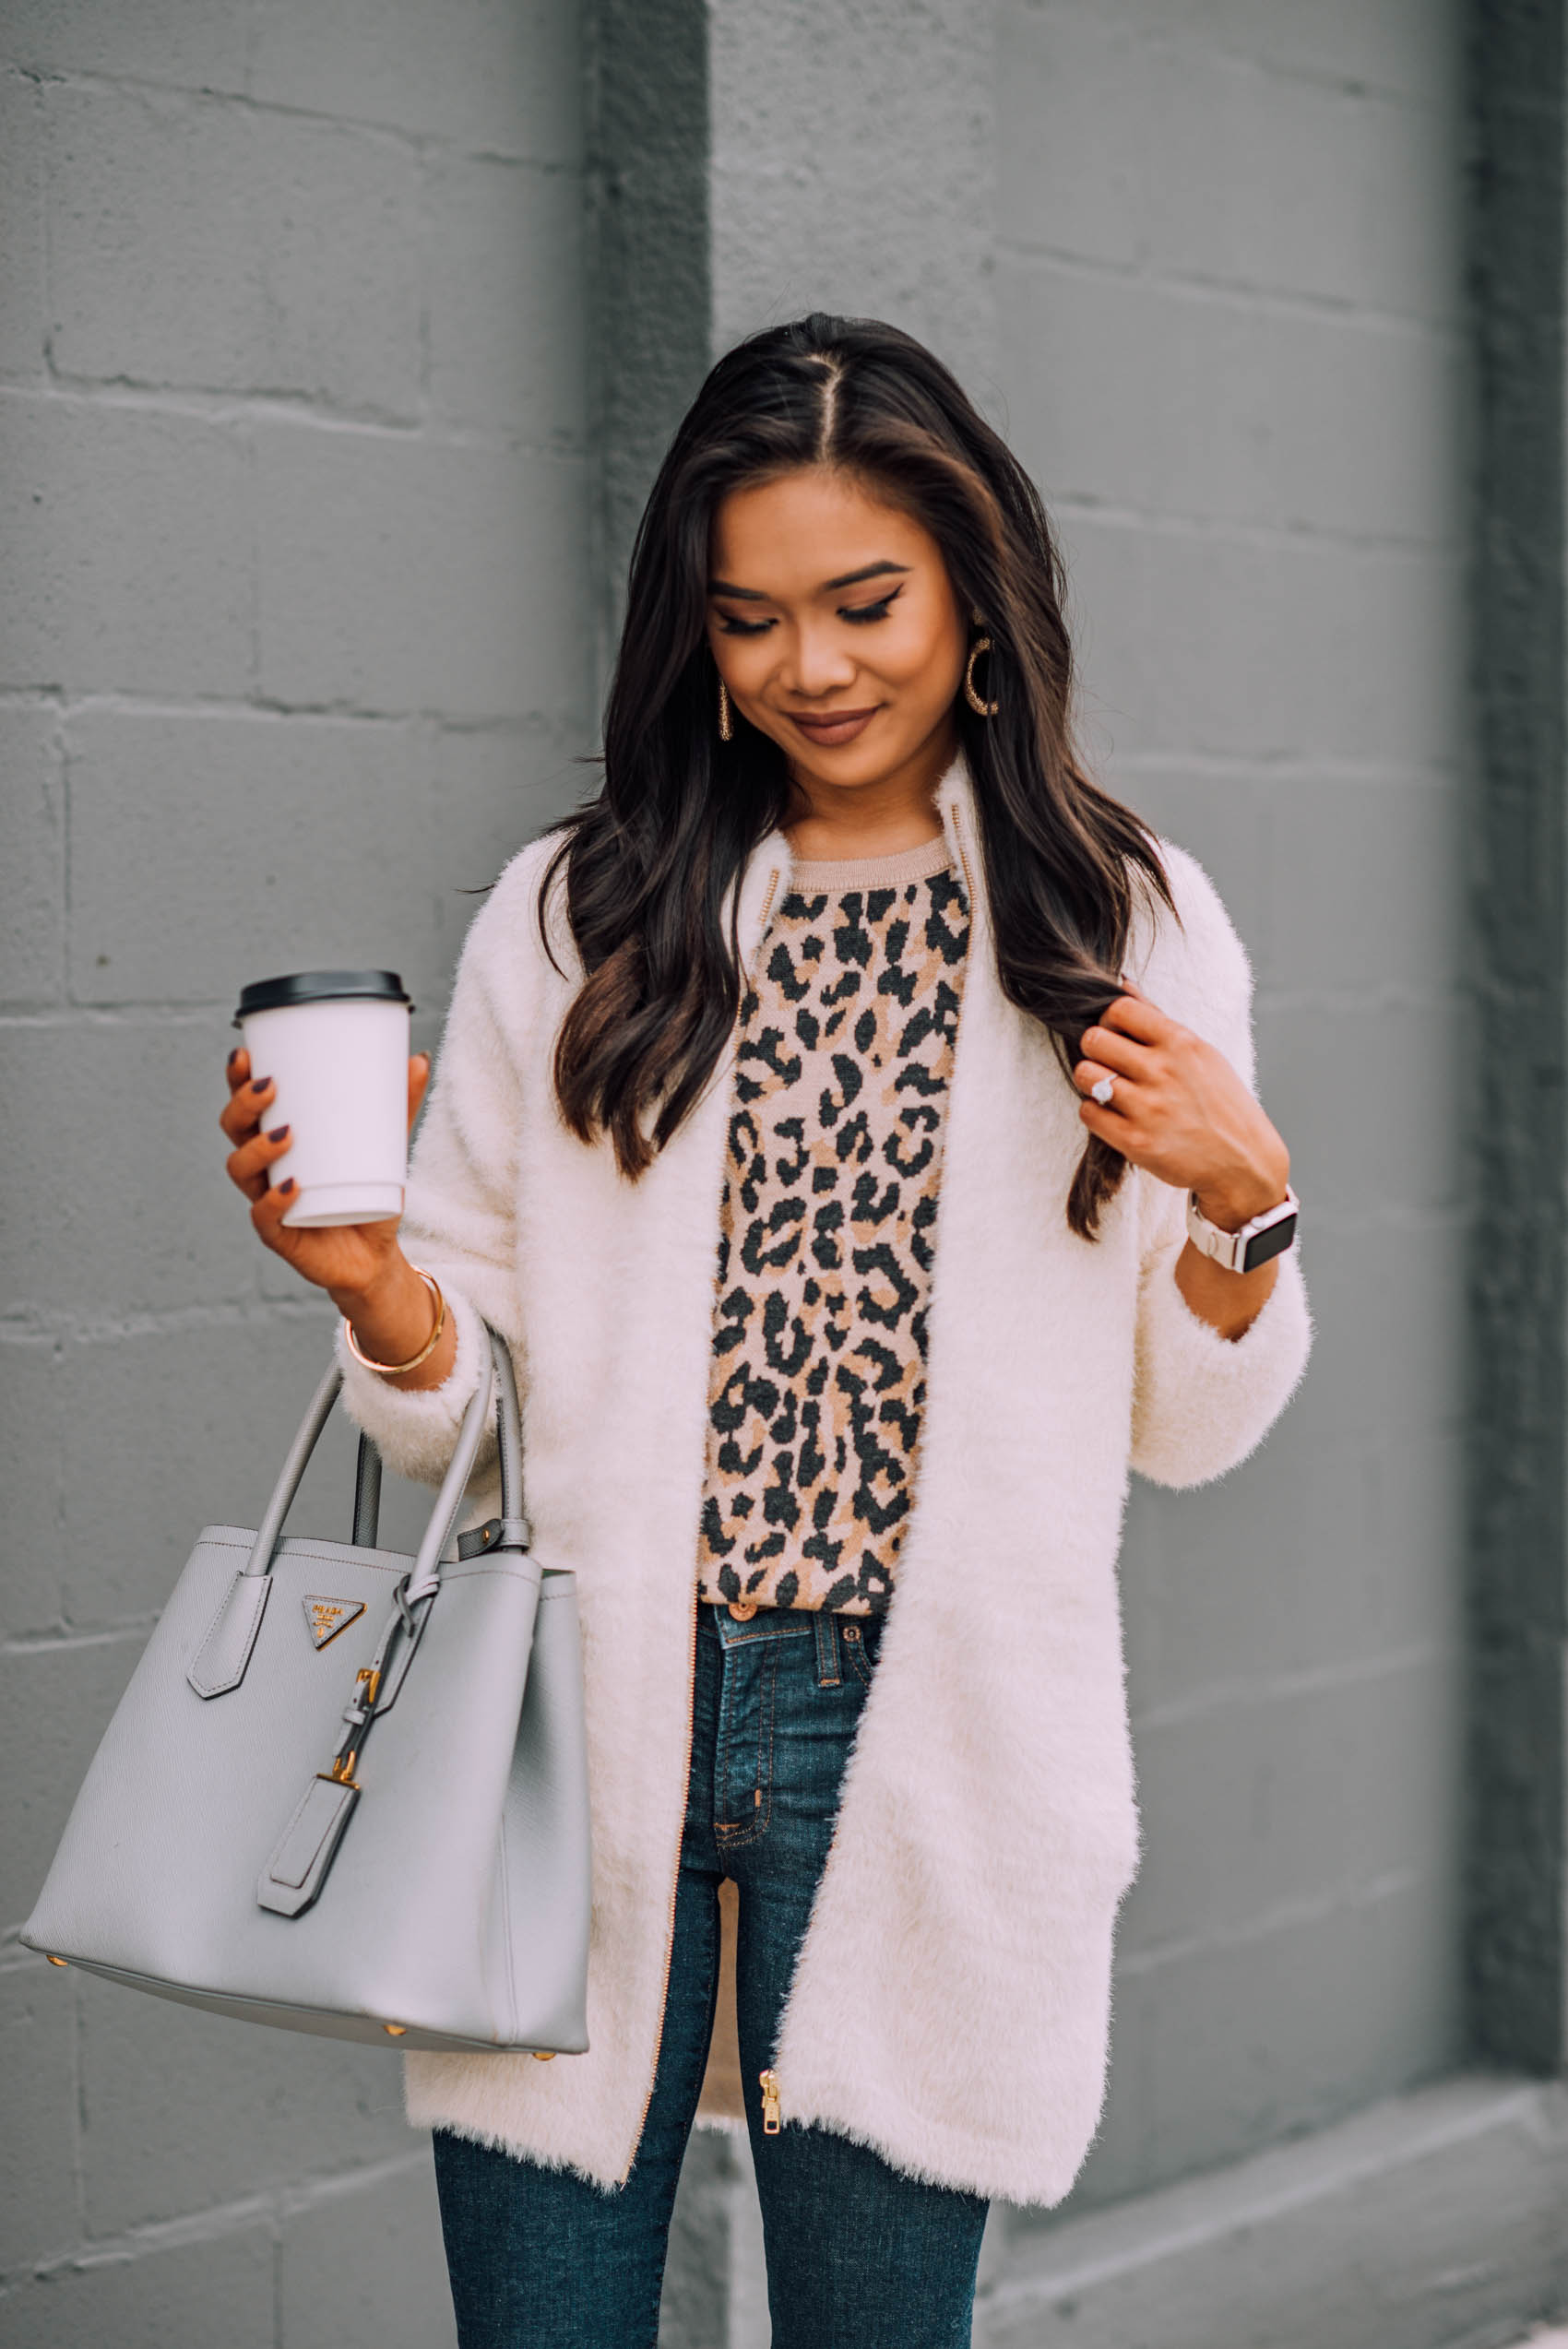 Blogger Hoang-Kim wears a fuzzy cardigan jacket with a leopard print sweatshirt for fall